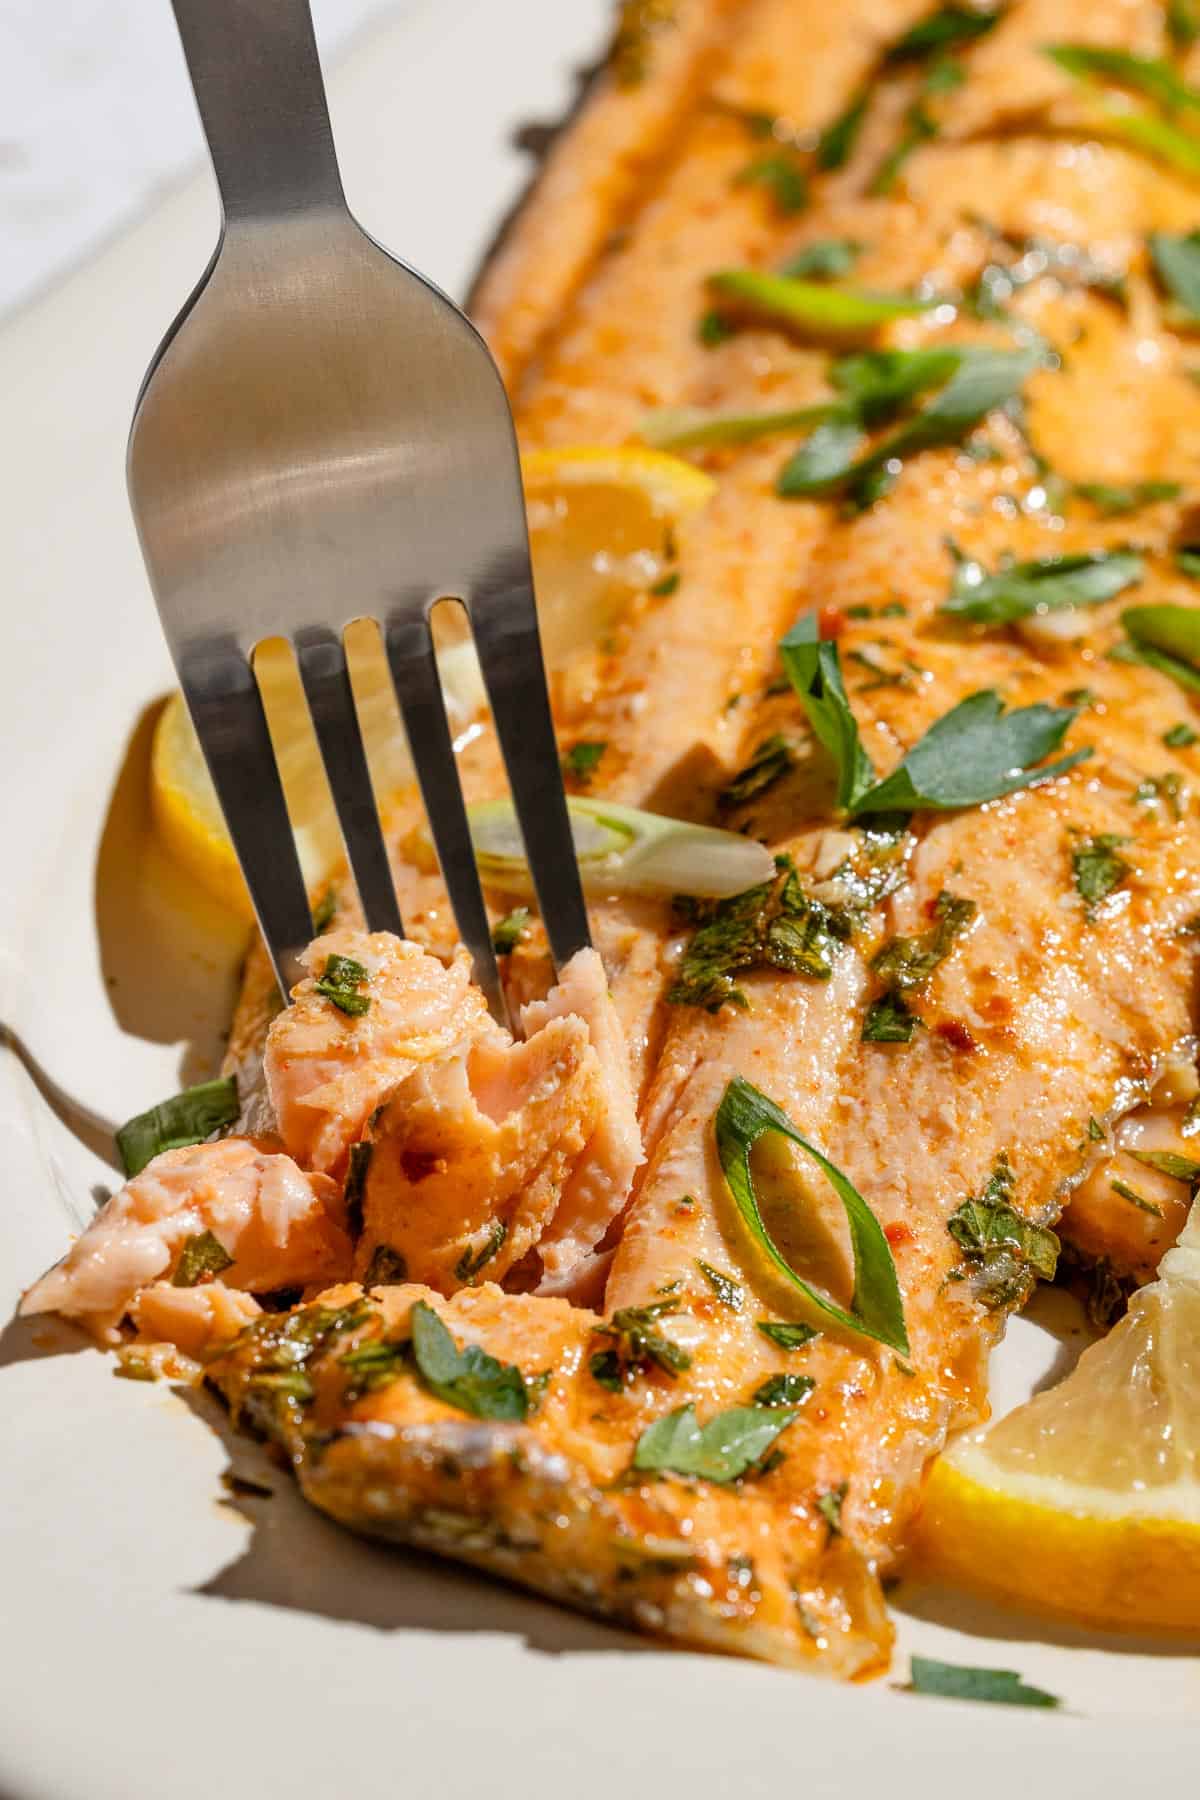 A close up of a fork digging into a baked trout fillet garnished with parsley, green onions and a lemon wedge.